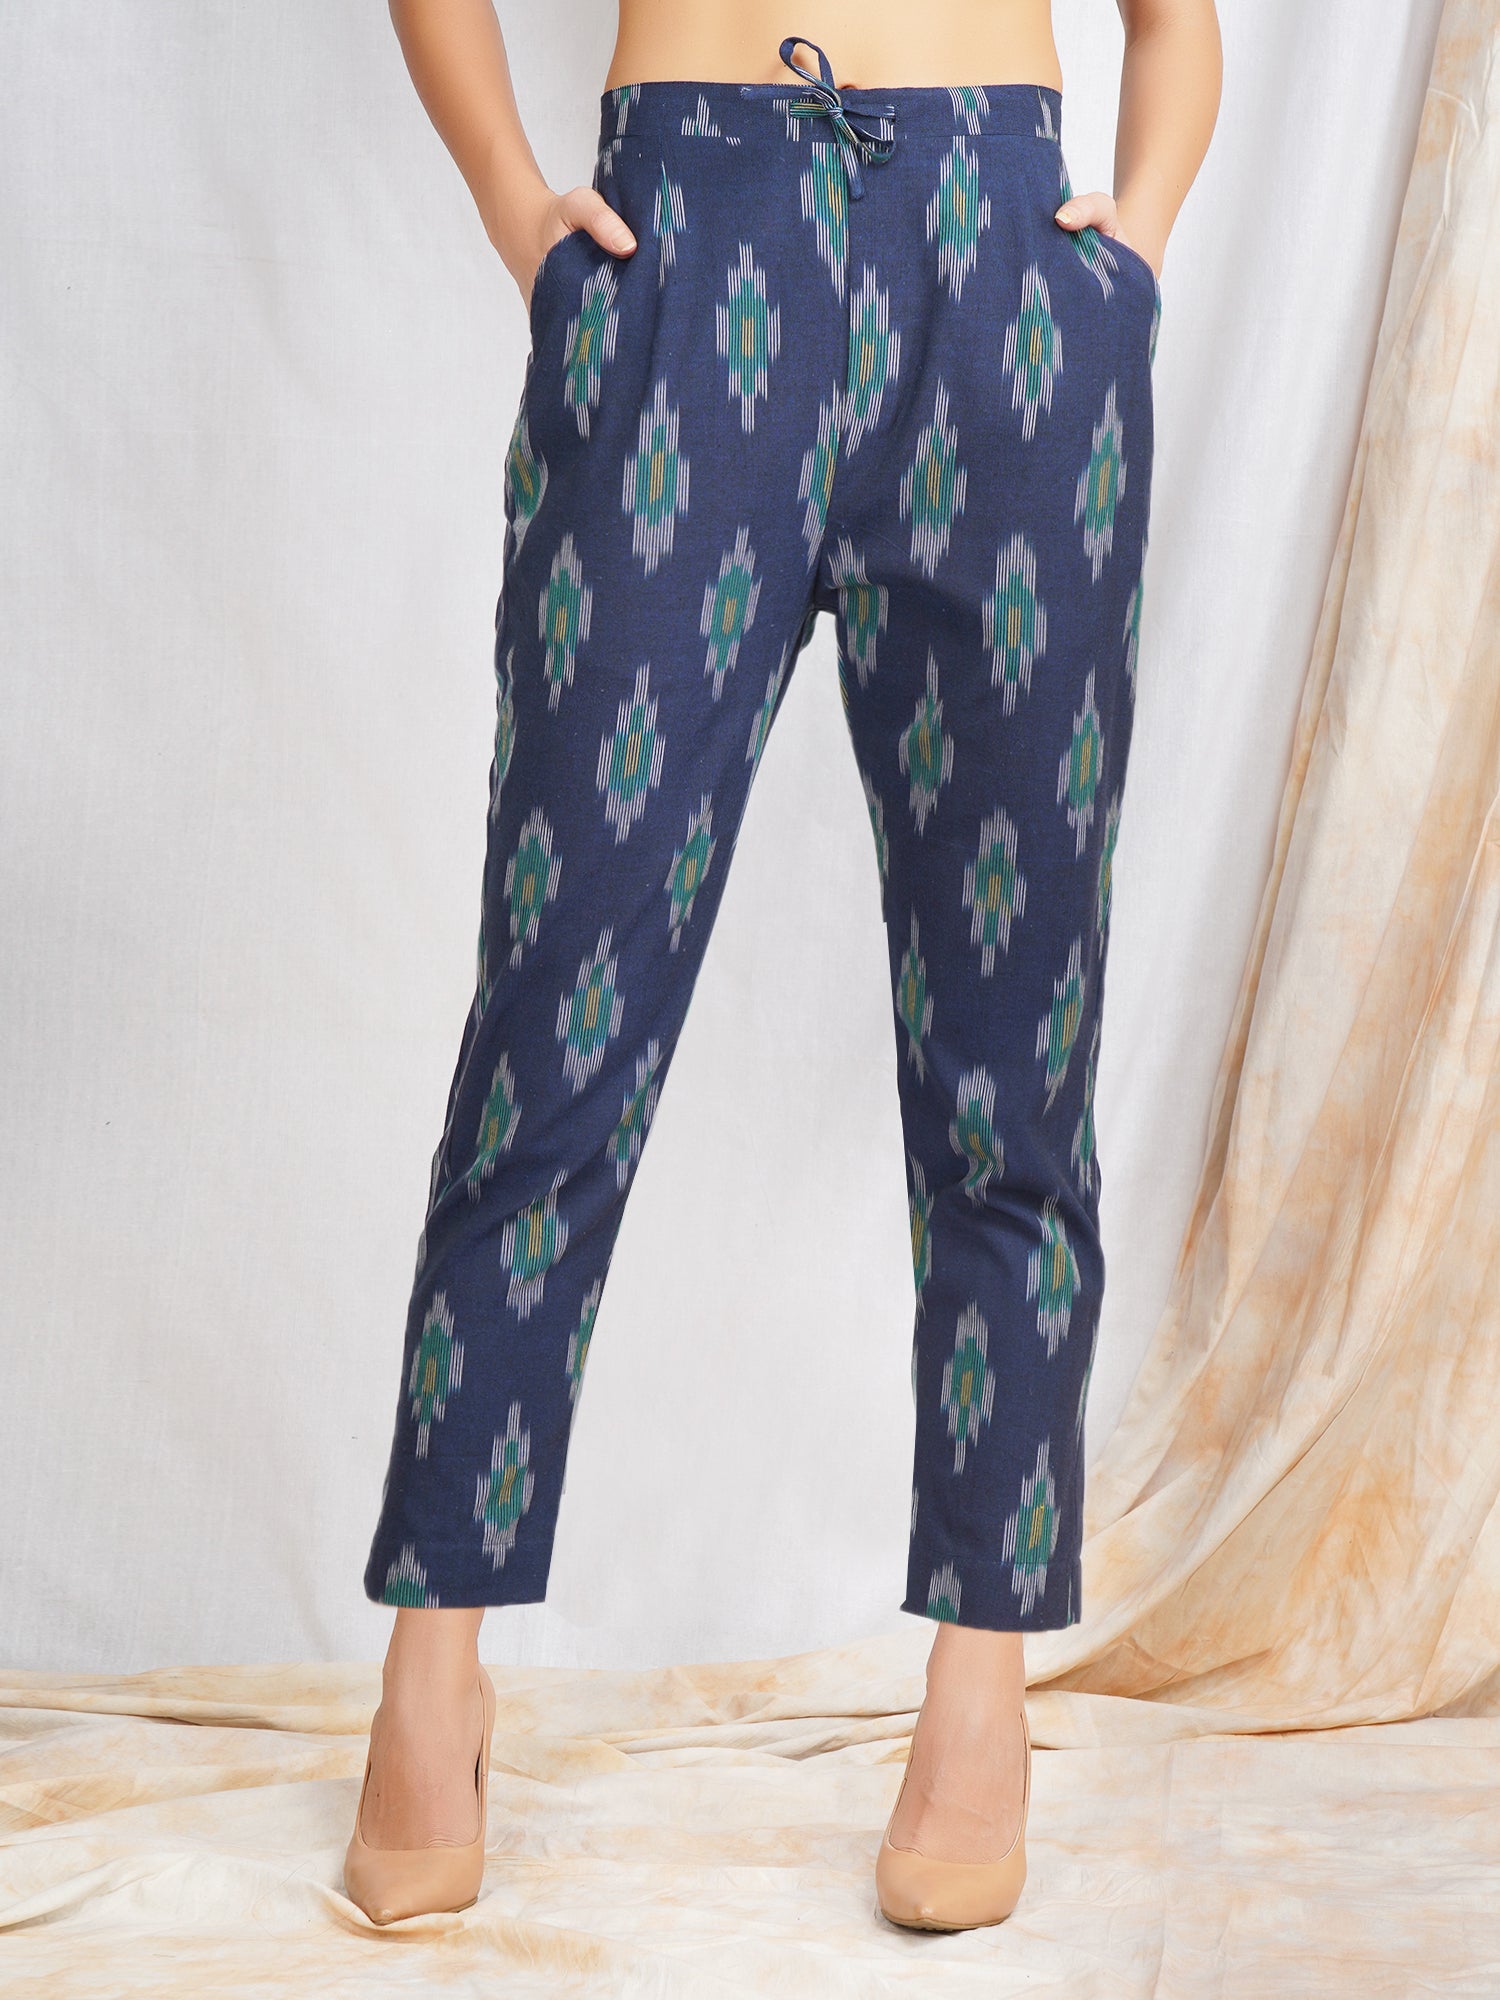 Ikat Cotton Pants for Ladies in Navy BLue color